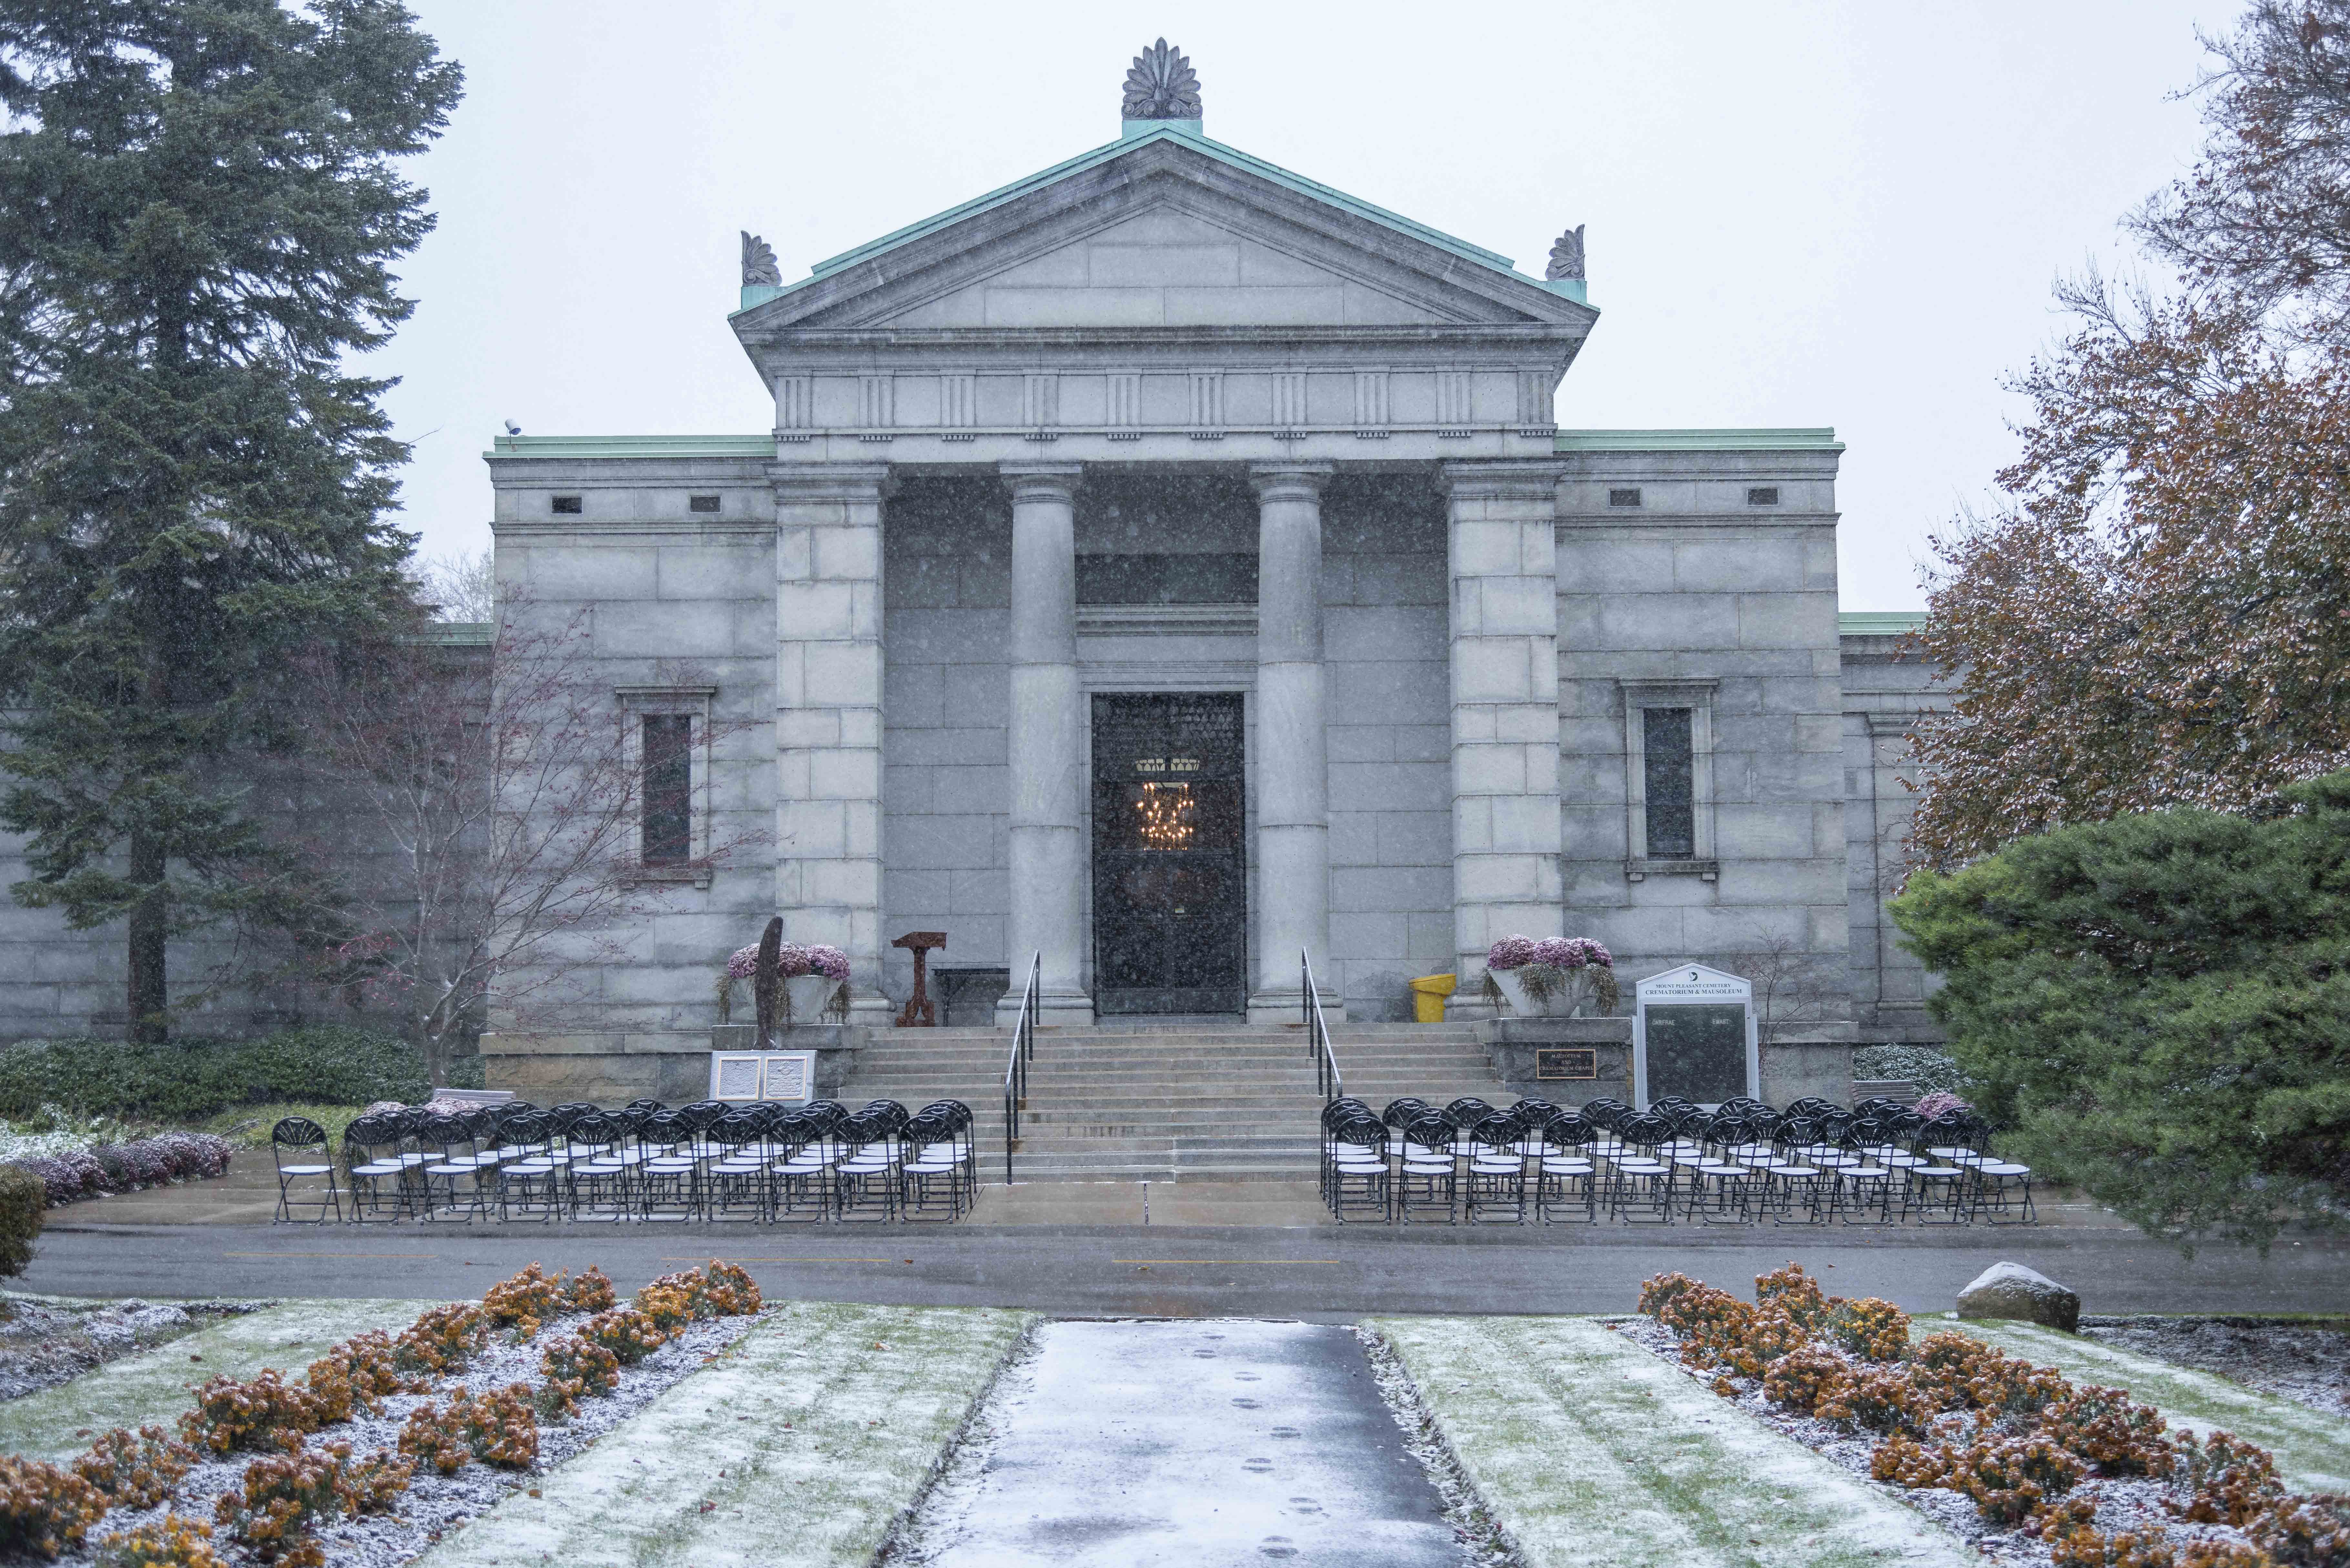 All is in readiness for the 2019 Remembrance Day ceremony in front of the mausoleum at Mount Pleasant Cemetery, Toronto, where Wing Commander William Barker, VC, is interred. PHOTO: Corporal Lynette Ai Dang, BM10-2019-0359-001